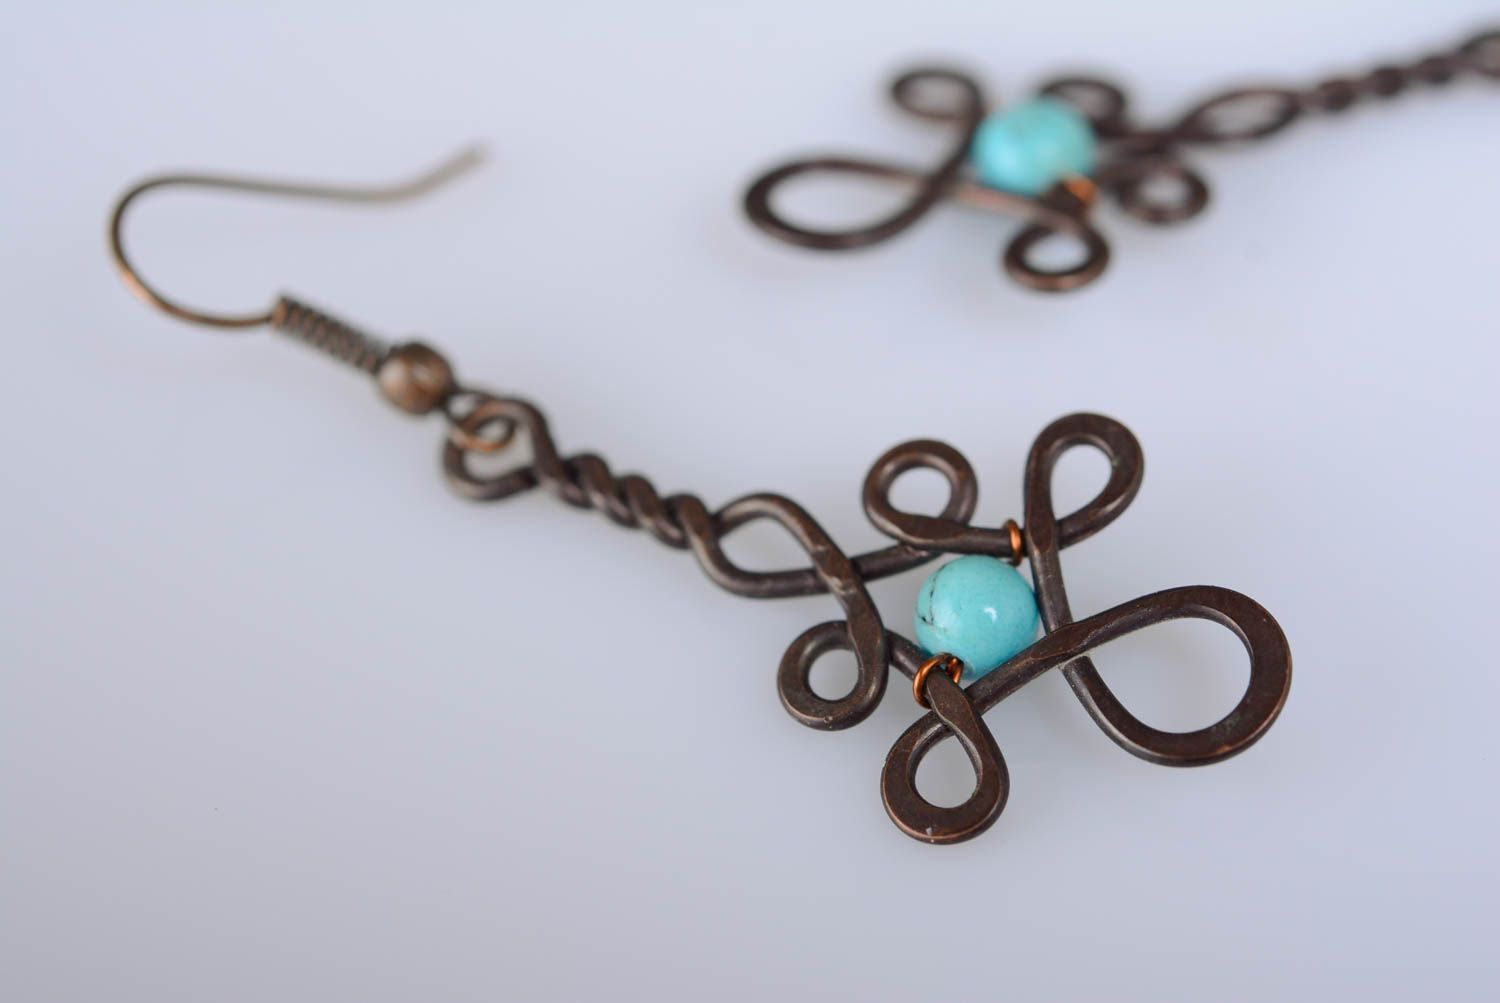 Long handmade earrings made of copper using wire wrap technique with artificial turquoise photo 2